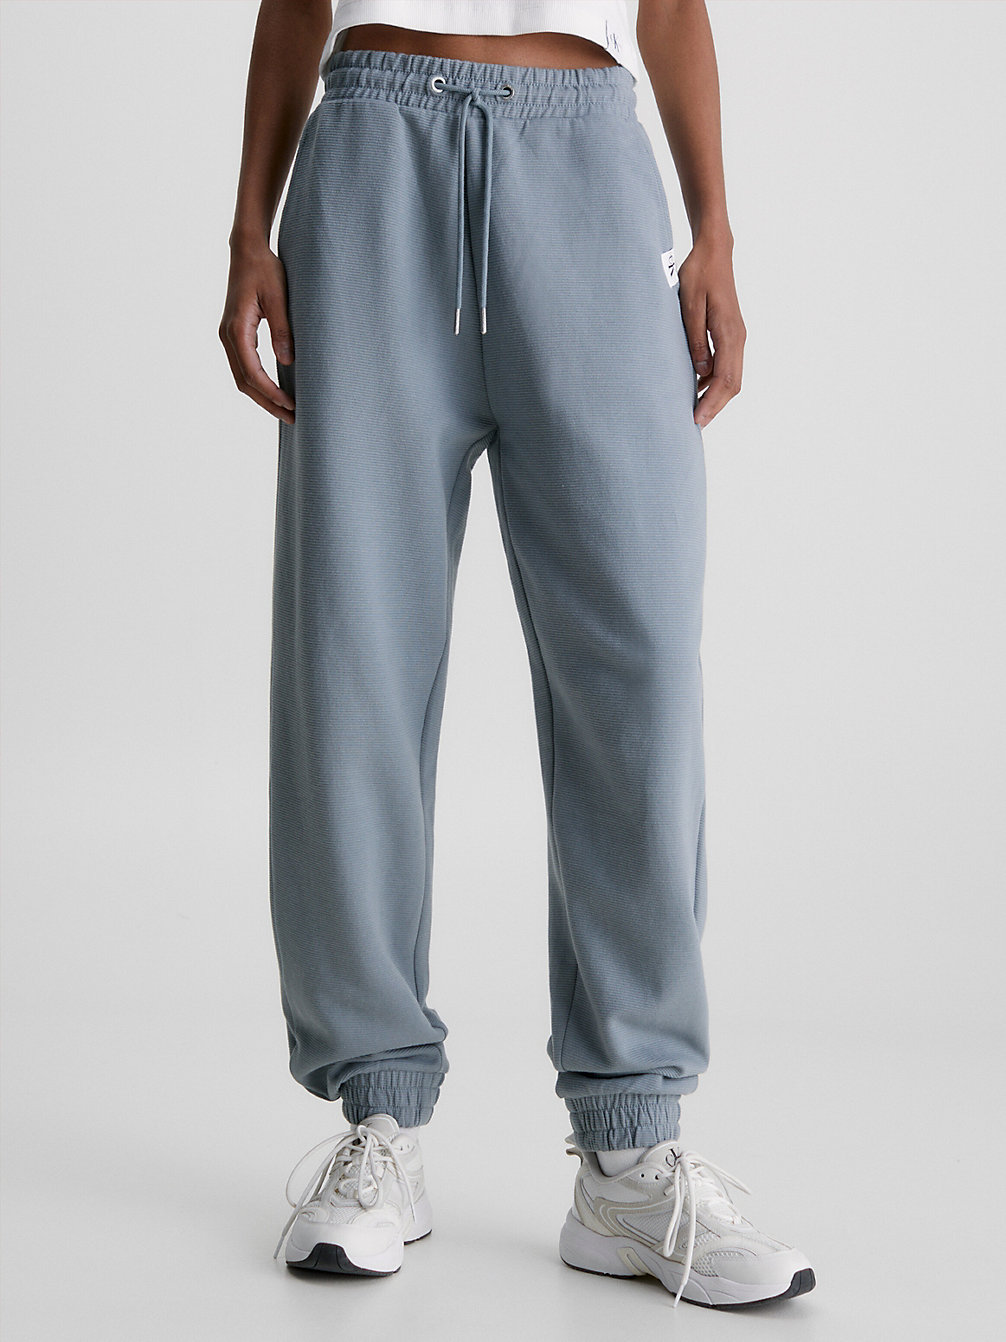 OVERCAST GREY > Relaxed Ribbed Ottoman Joggers > undefined Женщины - Calvin Klein